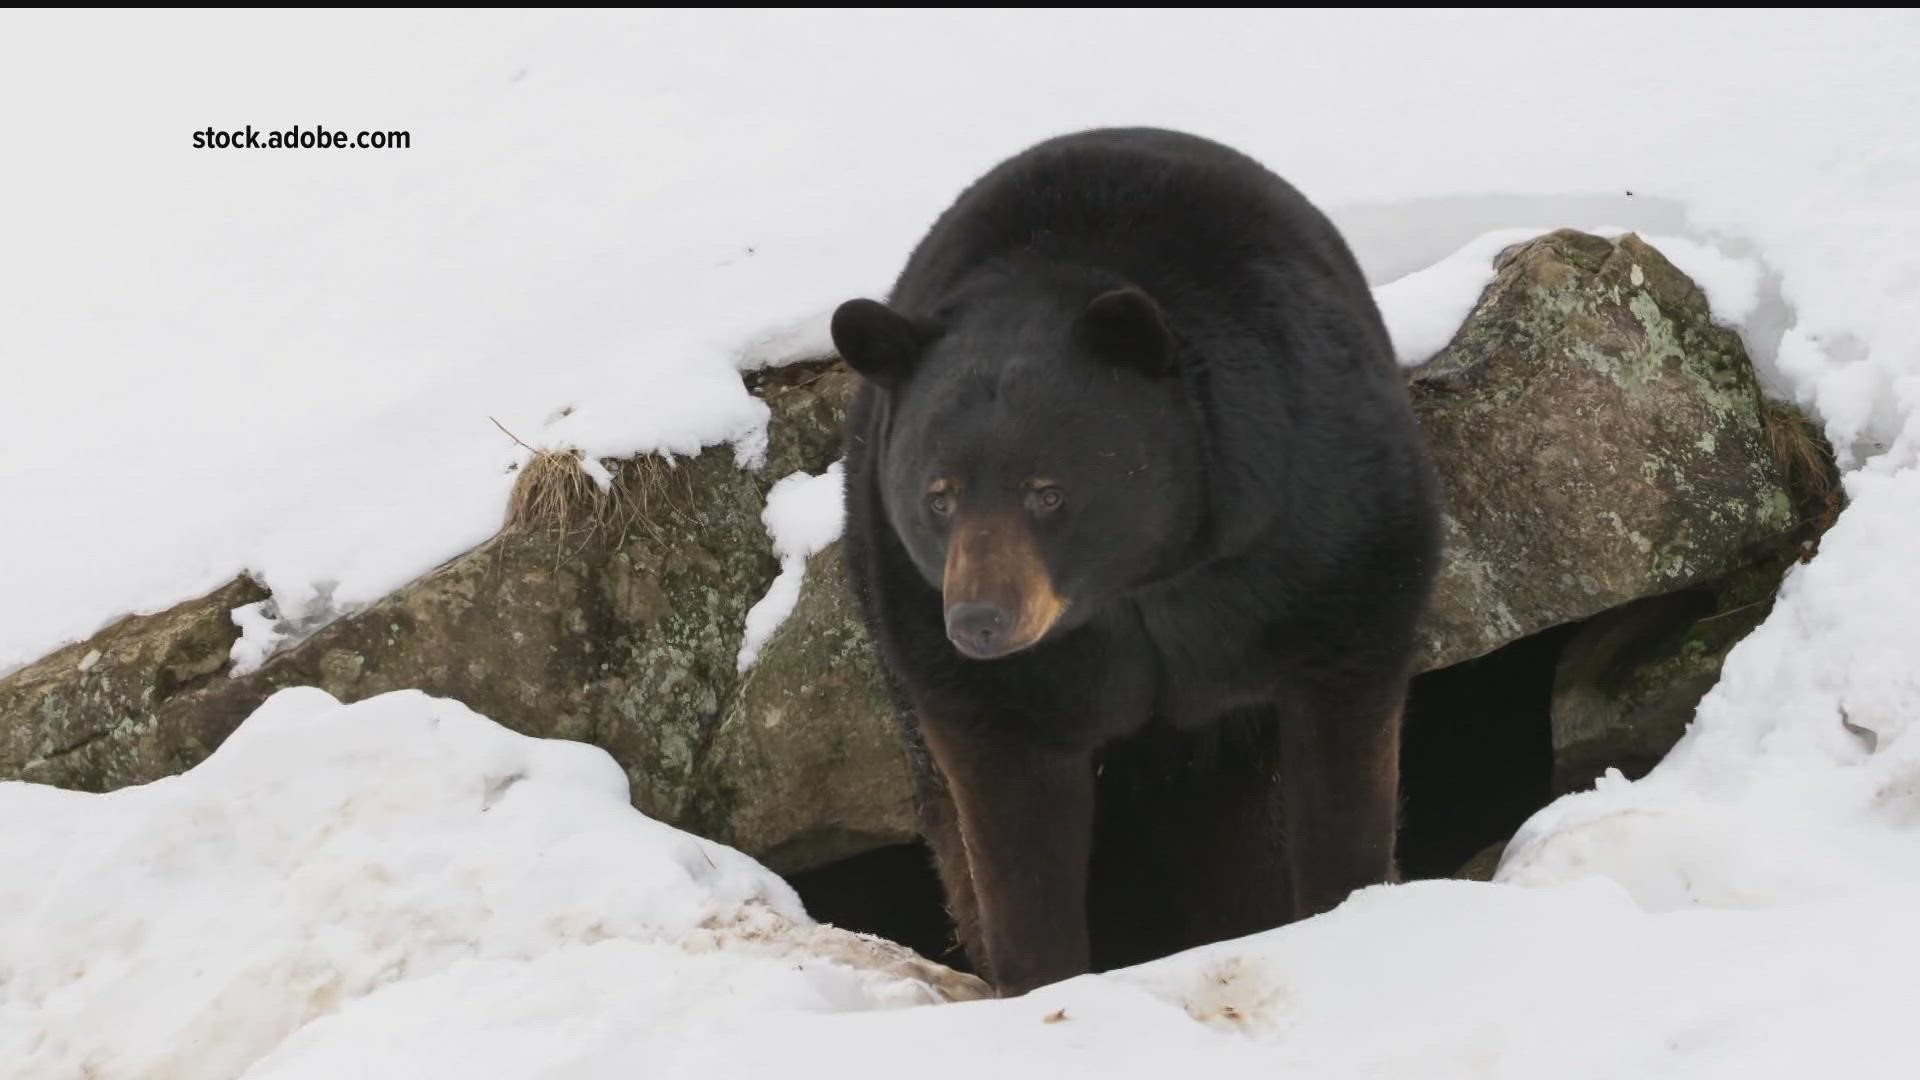 While black bears are probably the most famous hibernators, lots of other species are in the thick of a long winter nap.